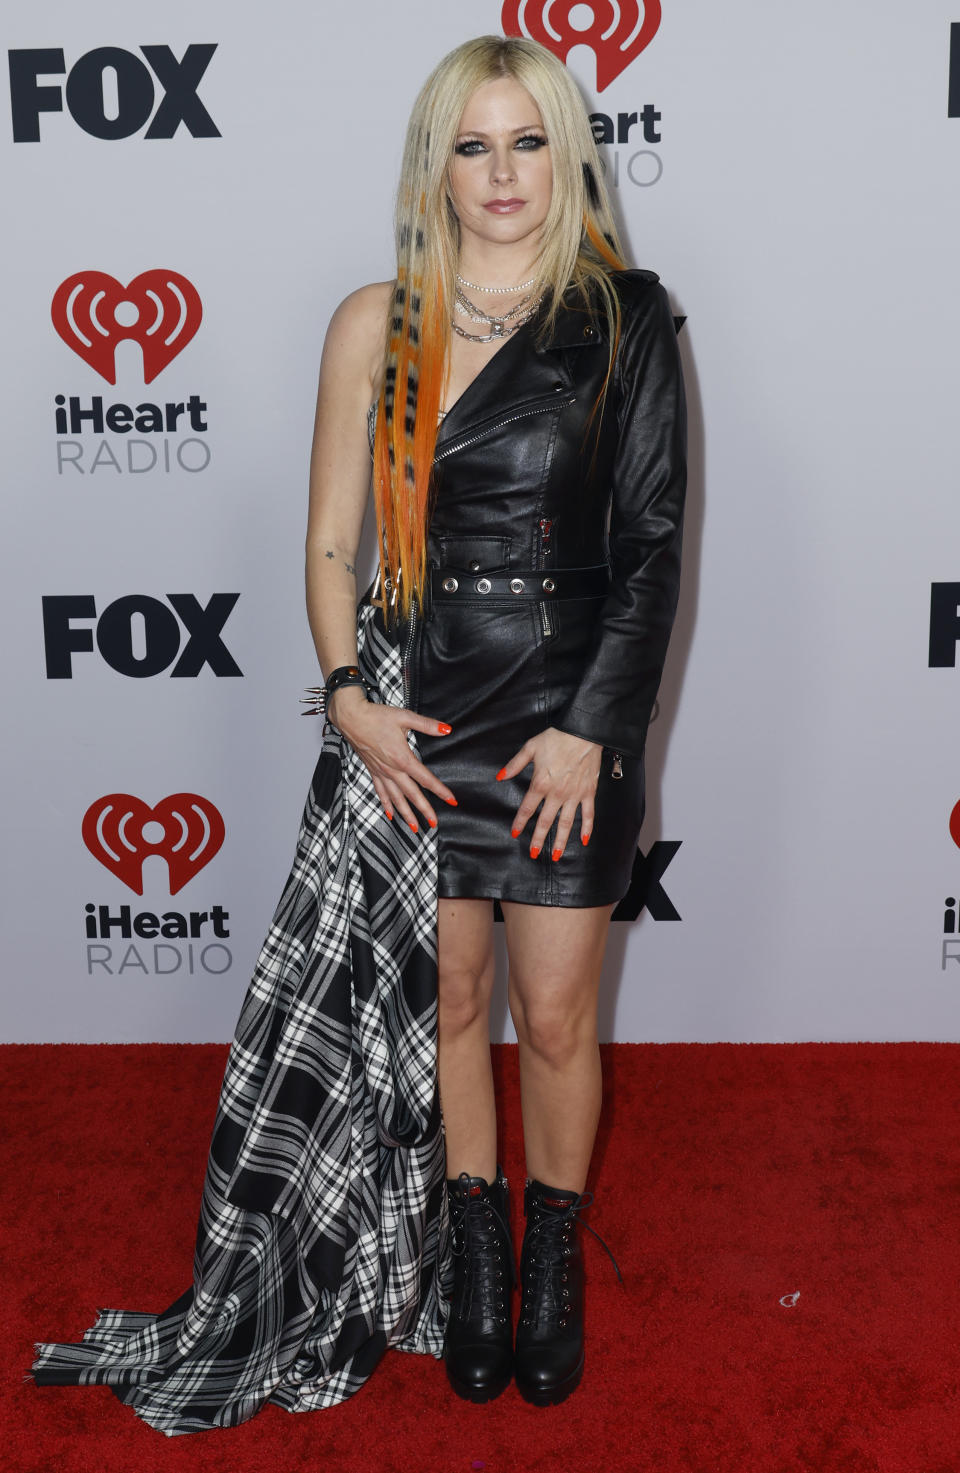 Avril Lavigne at the iHeartRadio Music Awards.